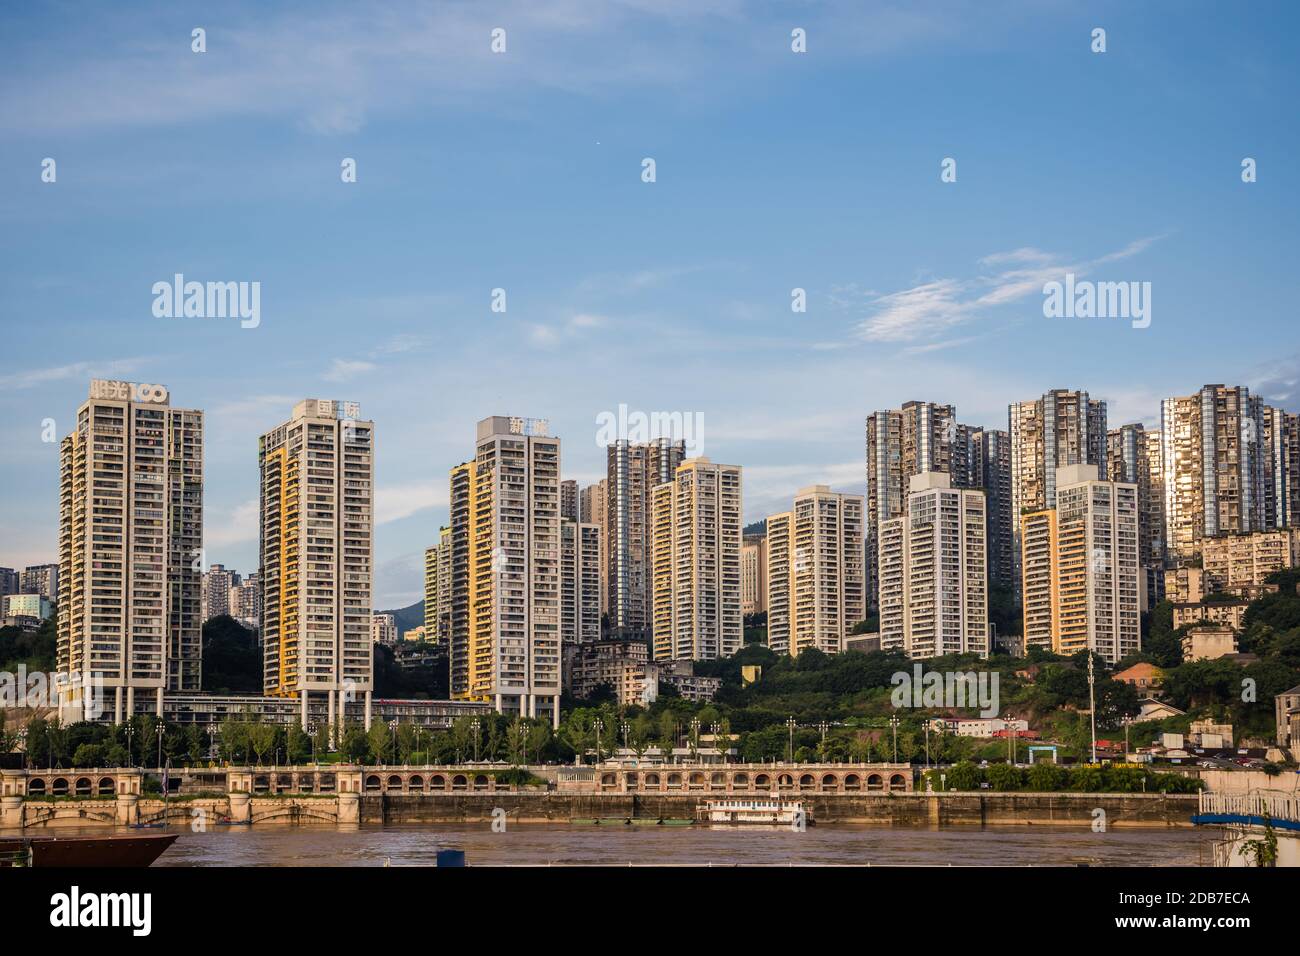 Chongqing, China - August 2019 : Residential blocks of flats on the bank of Yangtze river in Chongqing town in summer Stock Photo